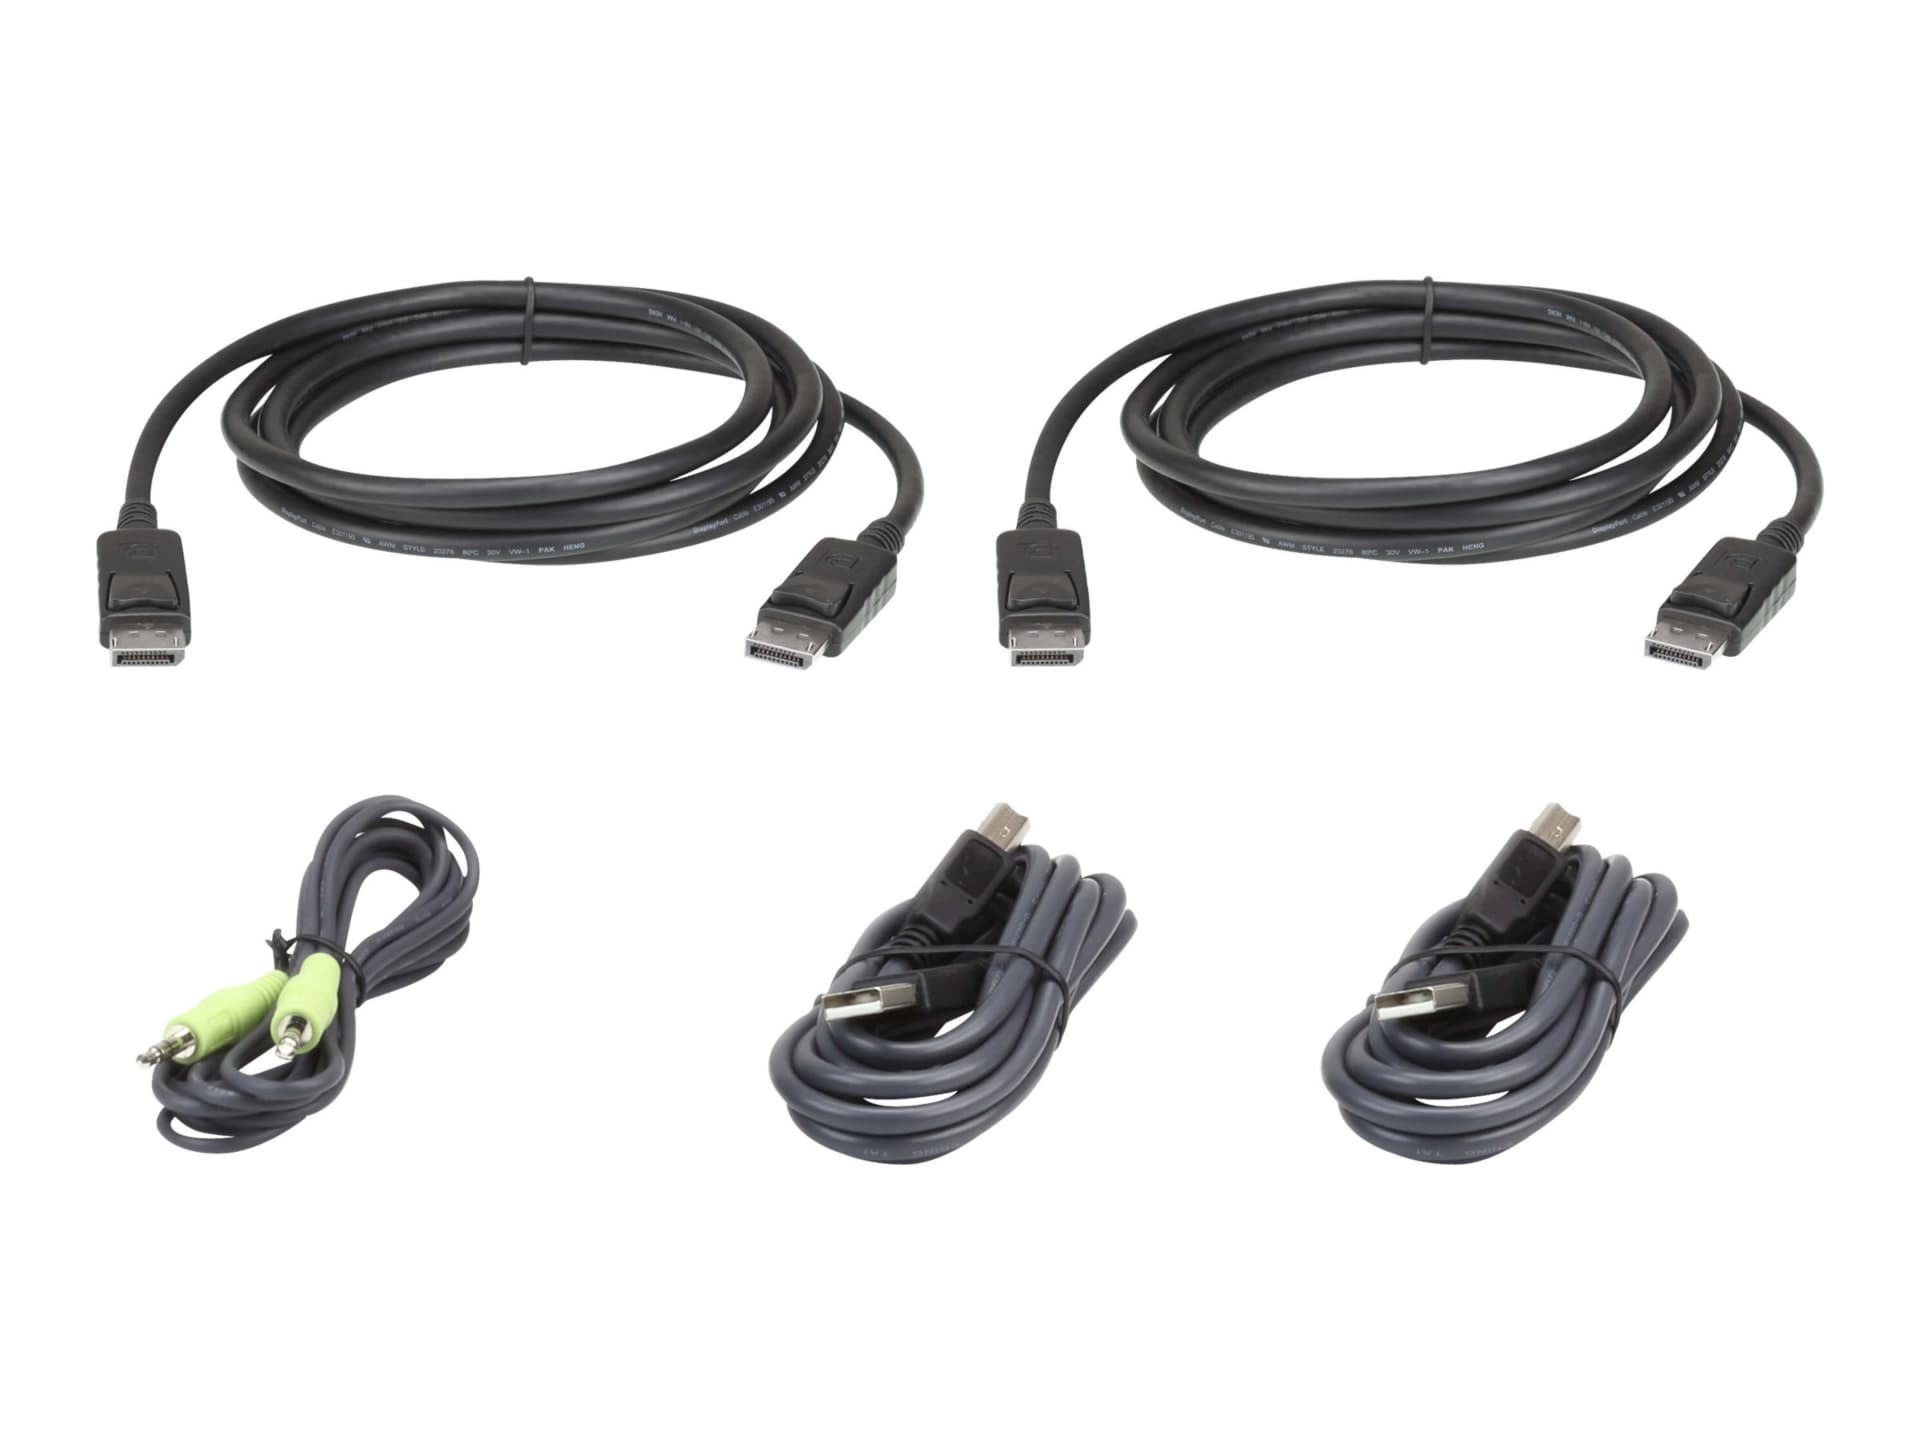 ATEN 2L-7D03UDPX5 - keyboard / video / mouse (KVM) cable kit - TAA Compliant